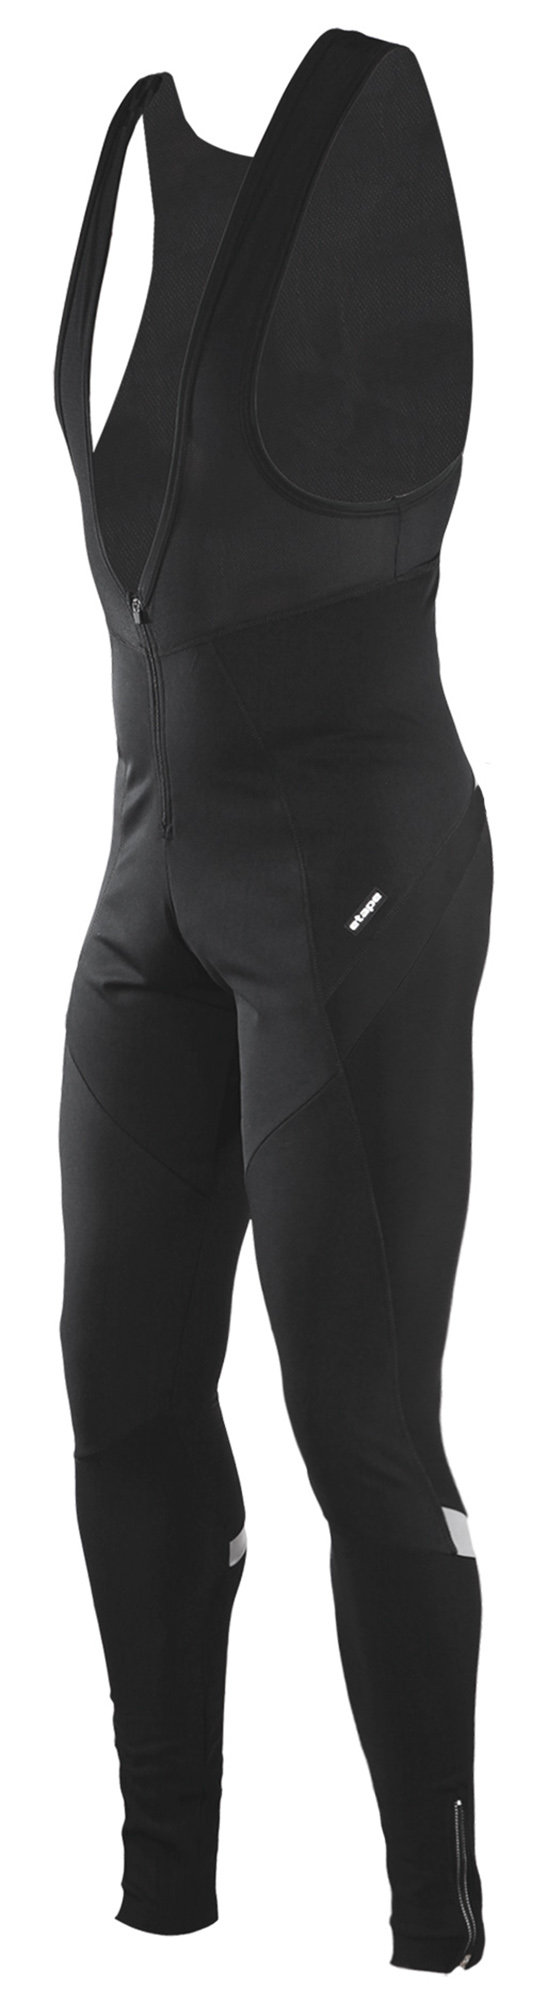 Men’s insulated cycling pants